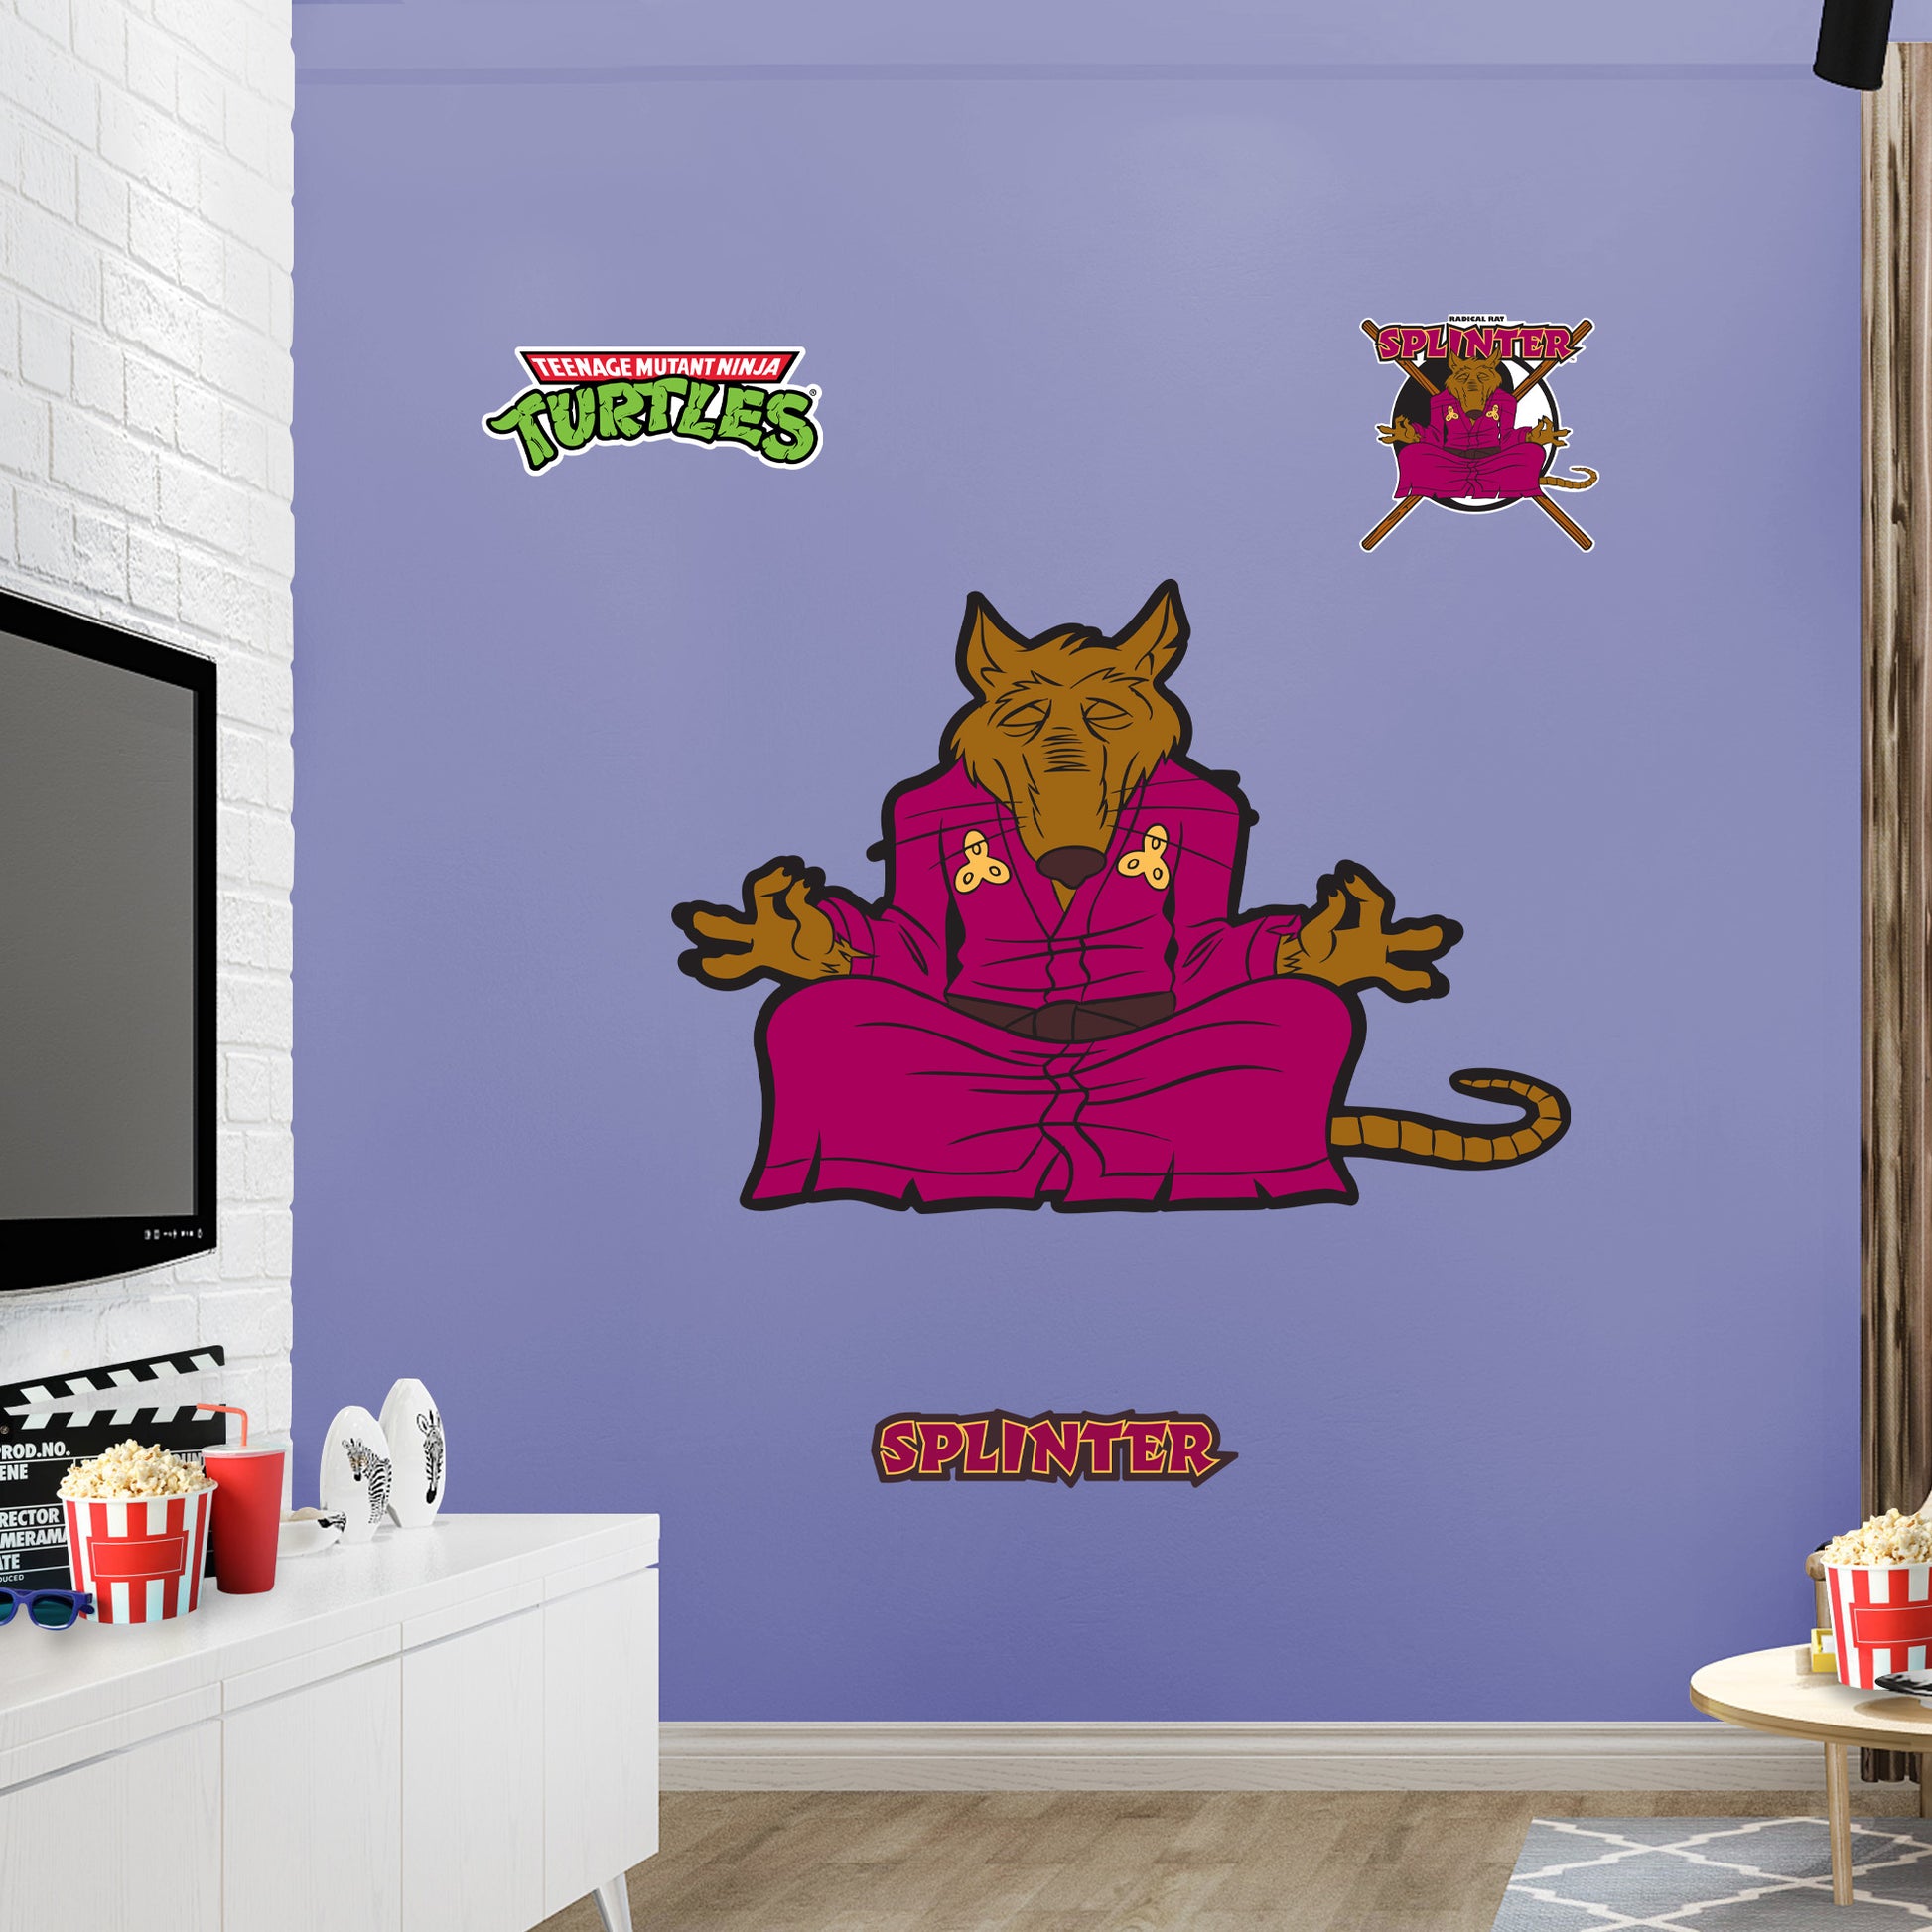 Giant Character +3 Decals  (48"W x 34"H) 